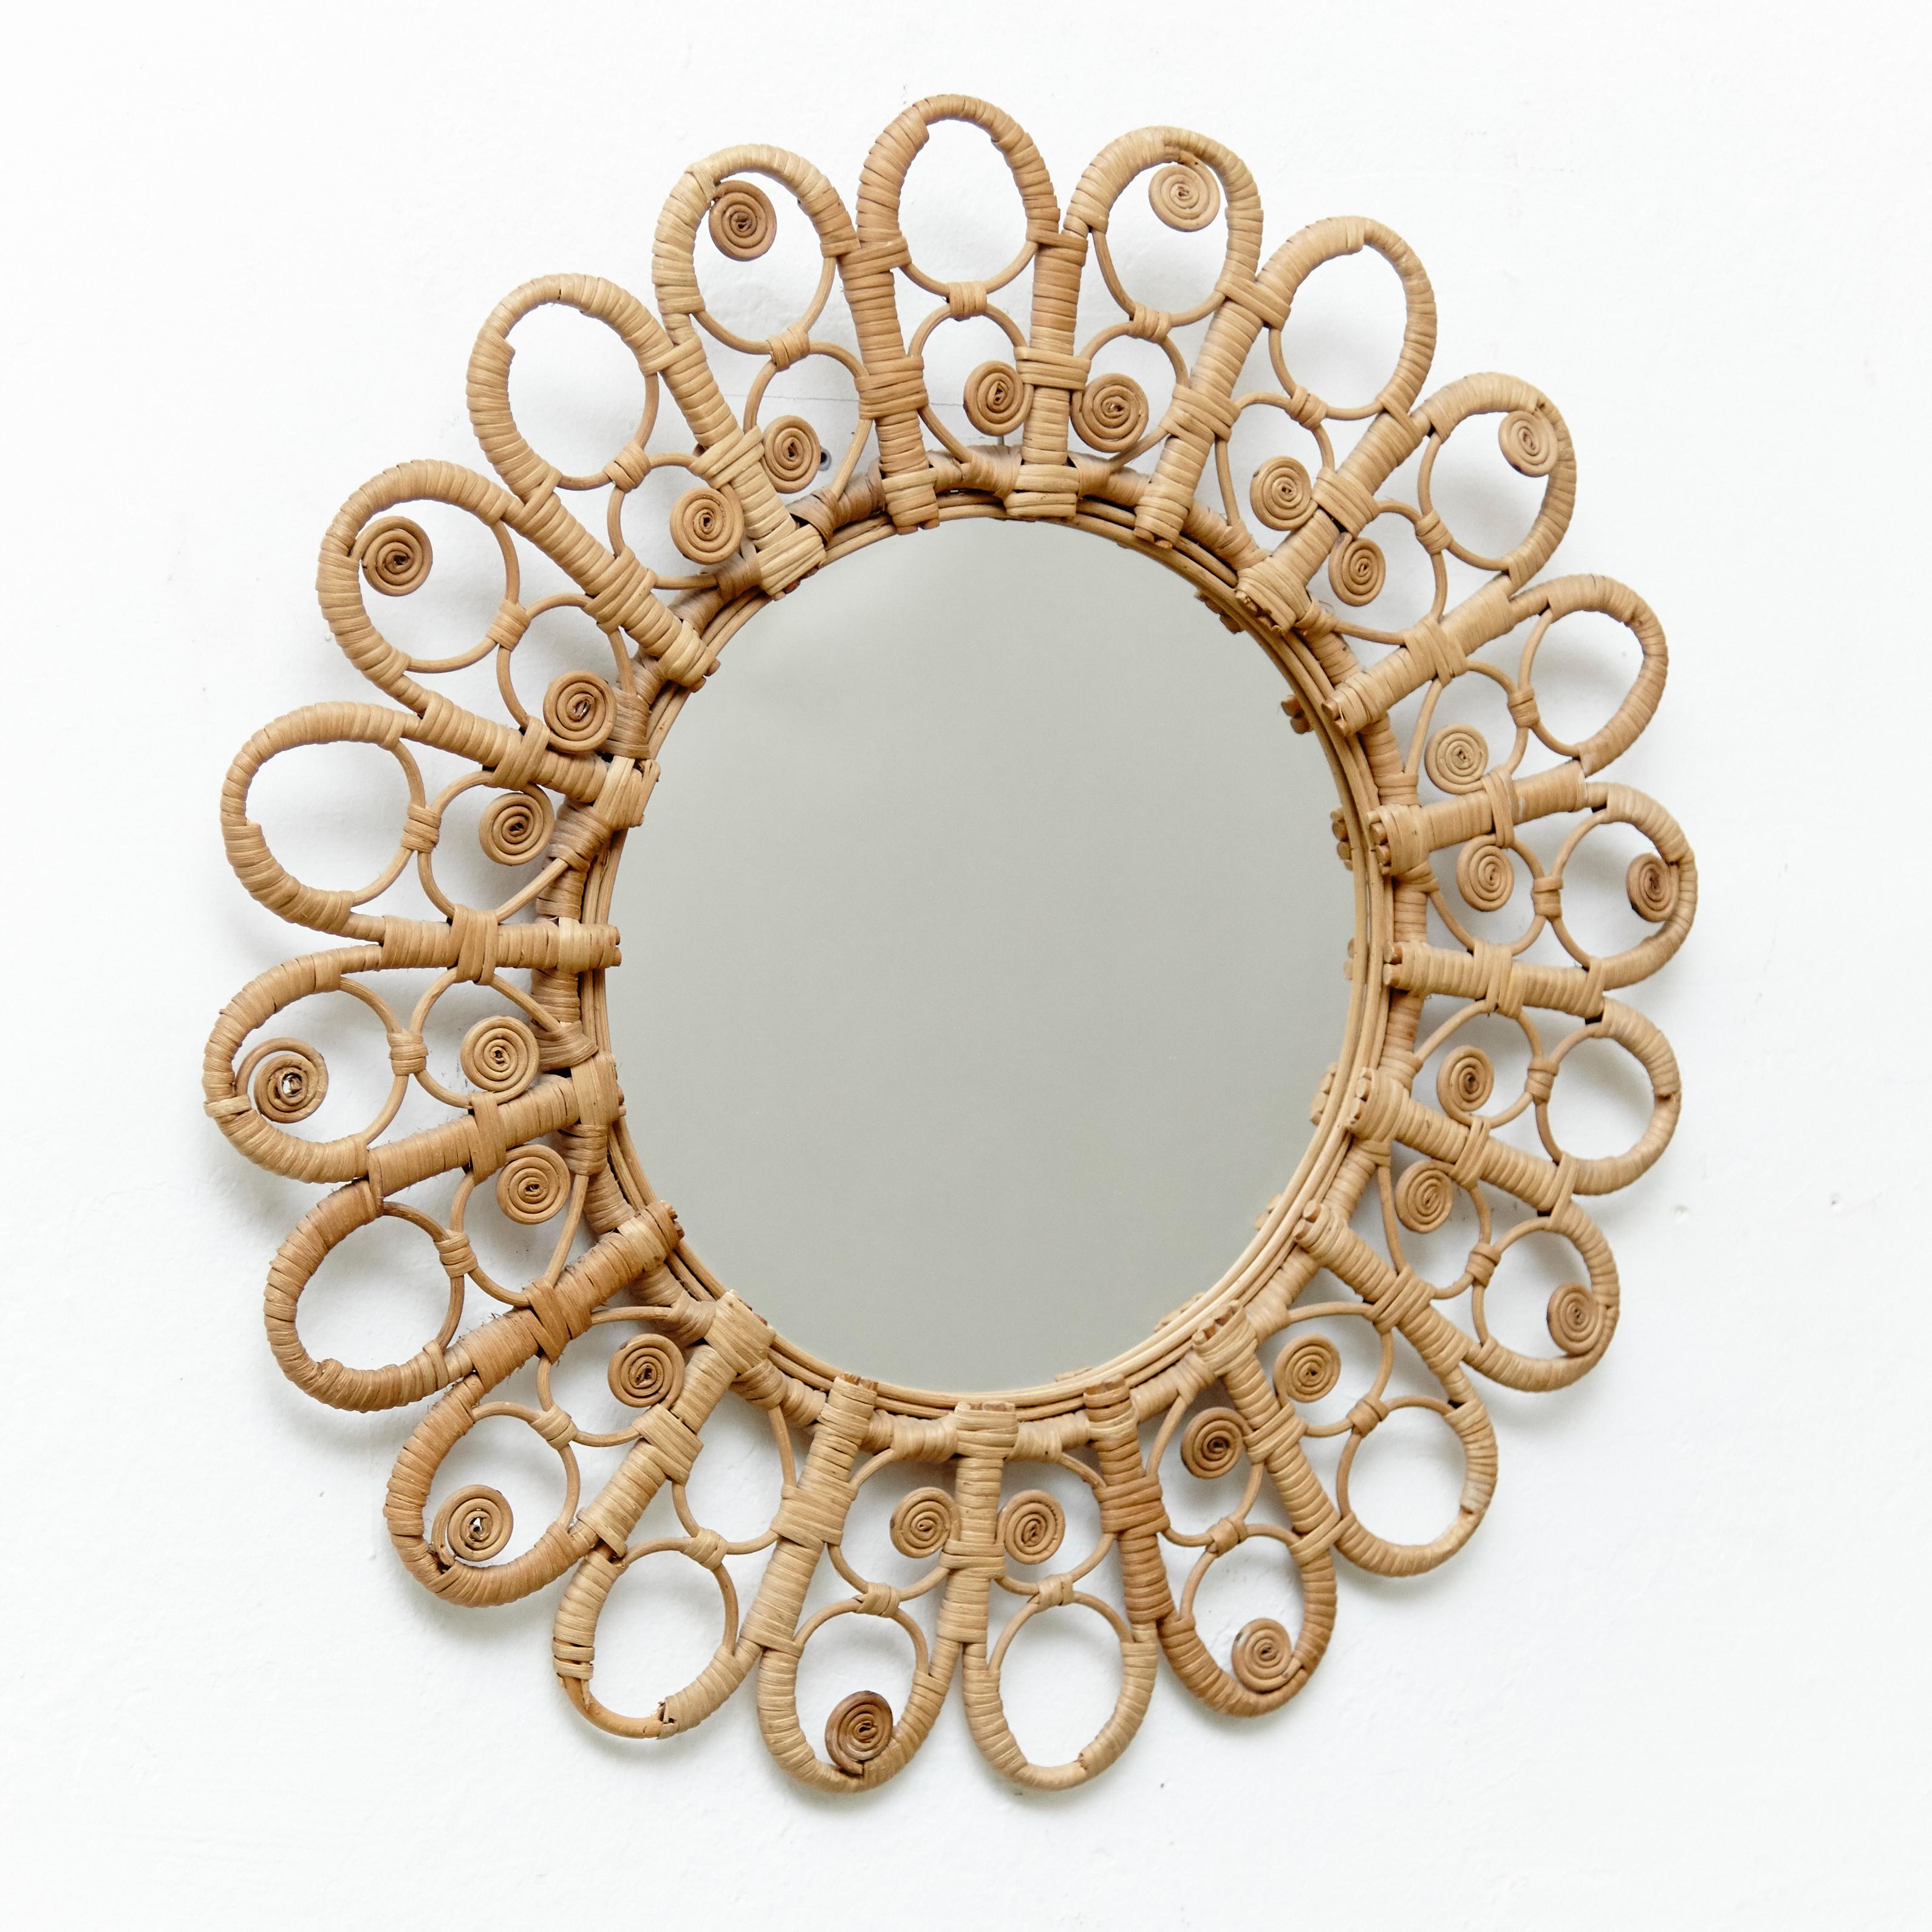 Mid-Century Modern handcrafted rattan peacock mirror, circa 1960
Traditionally manufactured in France with decorative spit curls.
By unknown designer.

In original condition with minor wear consistent of age and use, preserving a beautiful